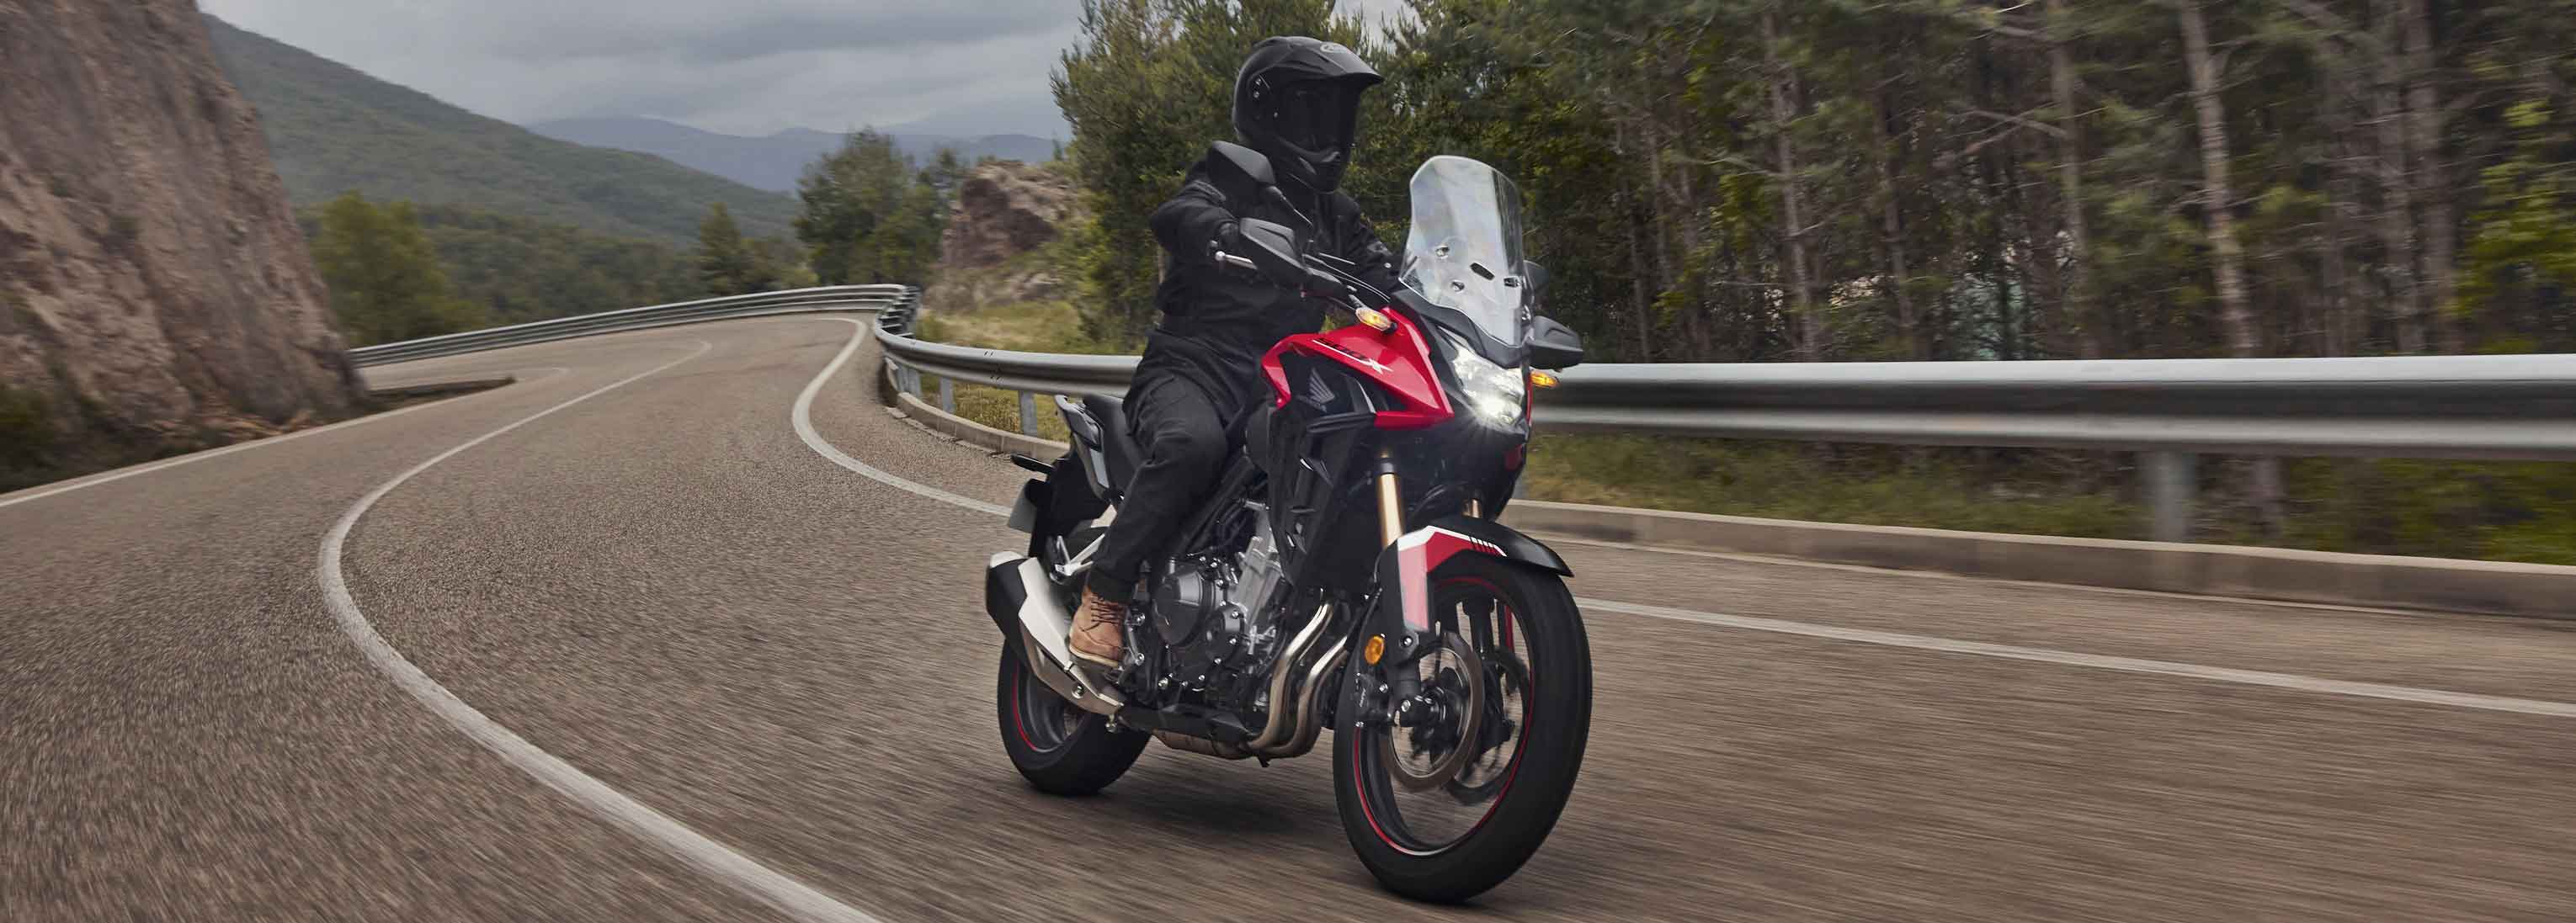 Honda CB500X launched in South Africa video-banner